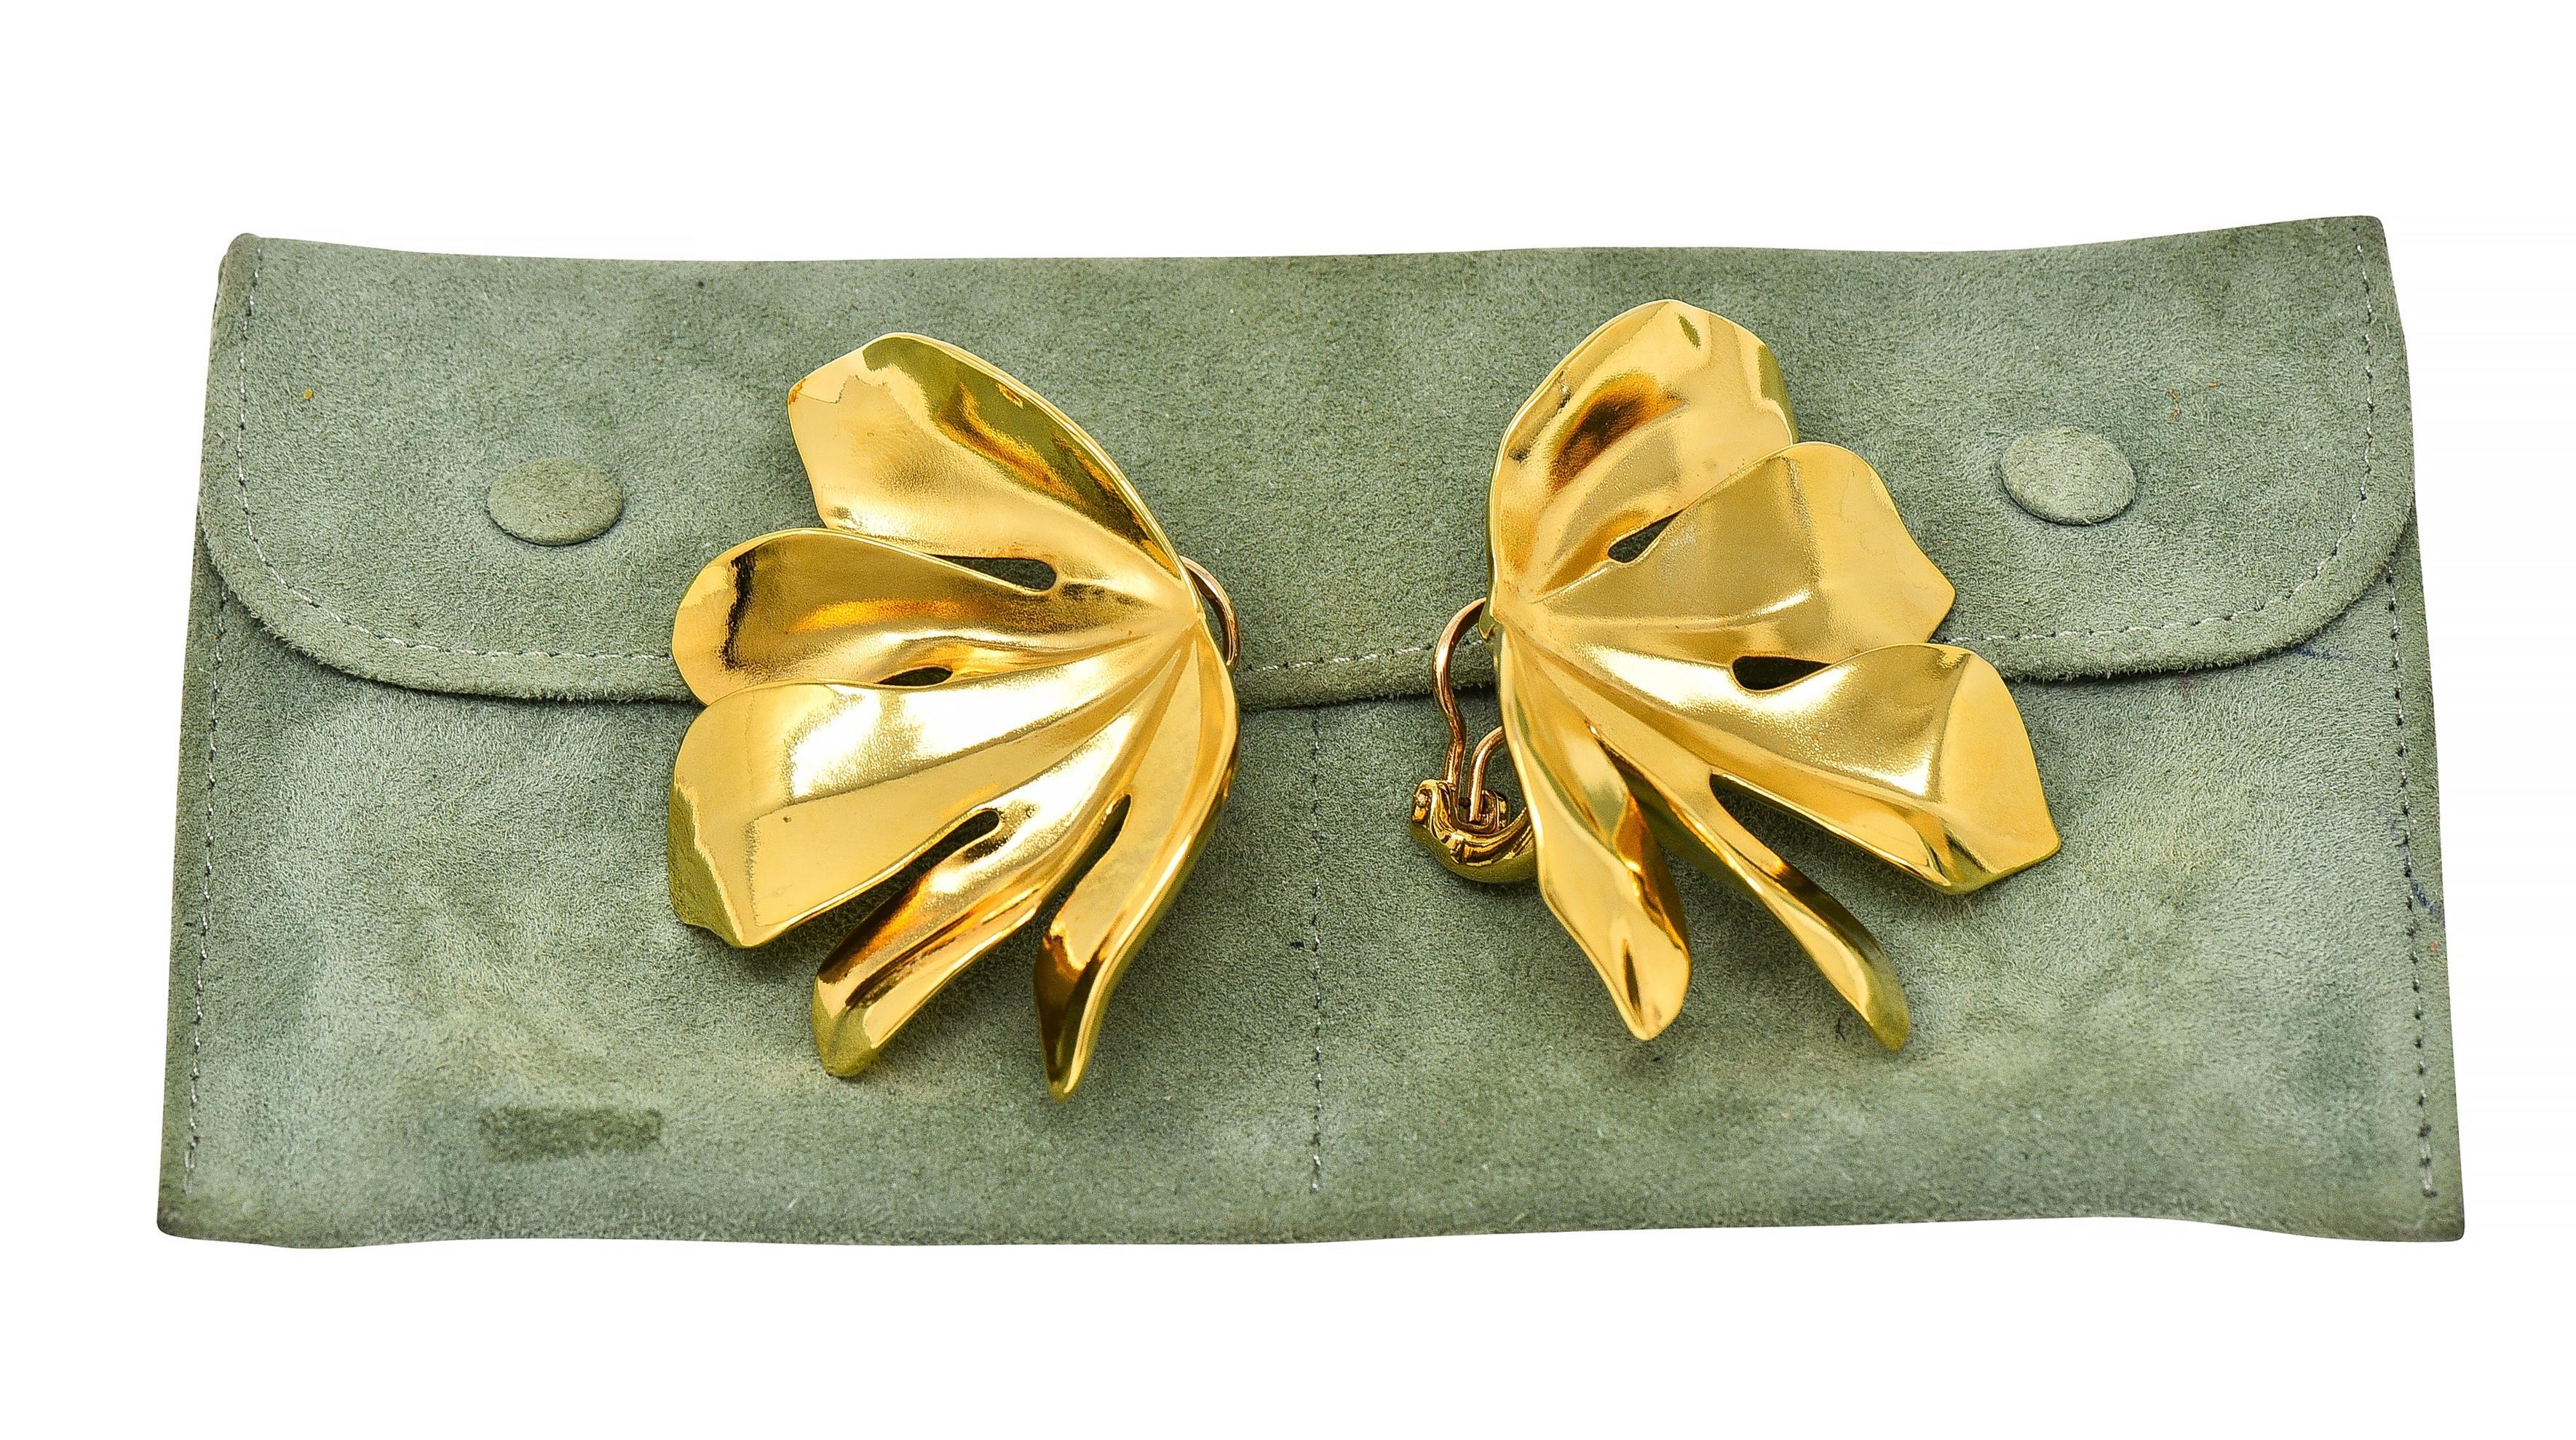 Designed as dimensional rendered aluminum fig leaves
Organically formed individual leaves with curling edges
Anodized high polished gold in color
Completed by hinged omega backs with silicone cushions
Stamped for aluminum
Omegas are stamped with